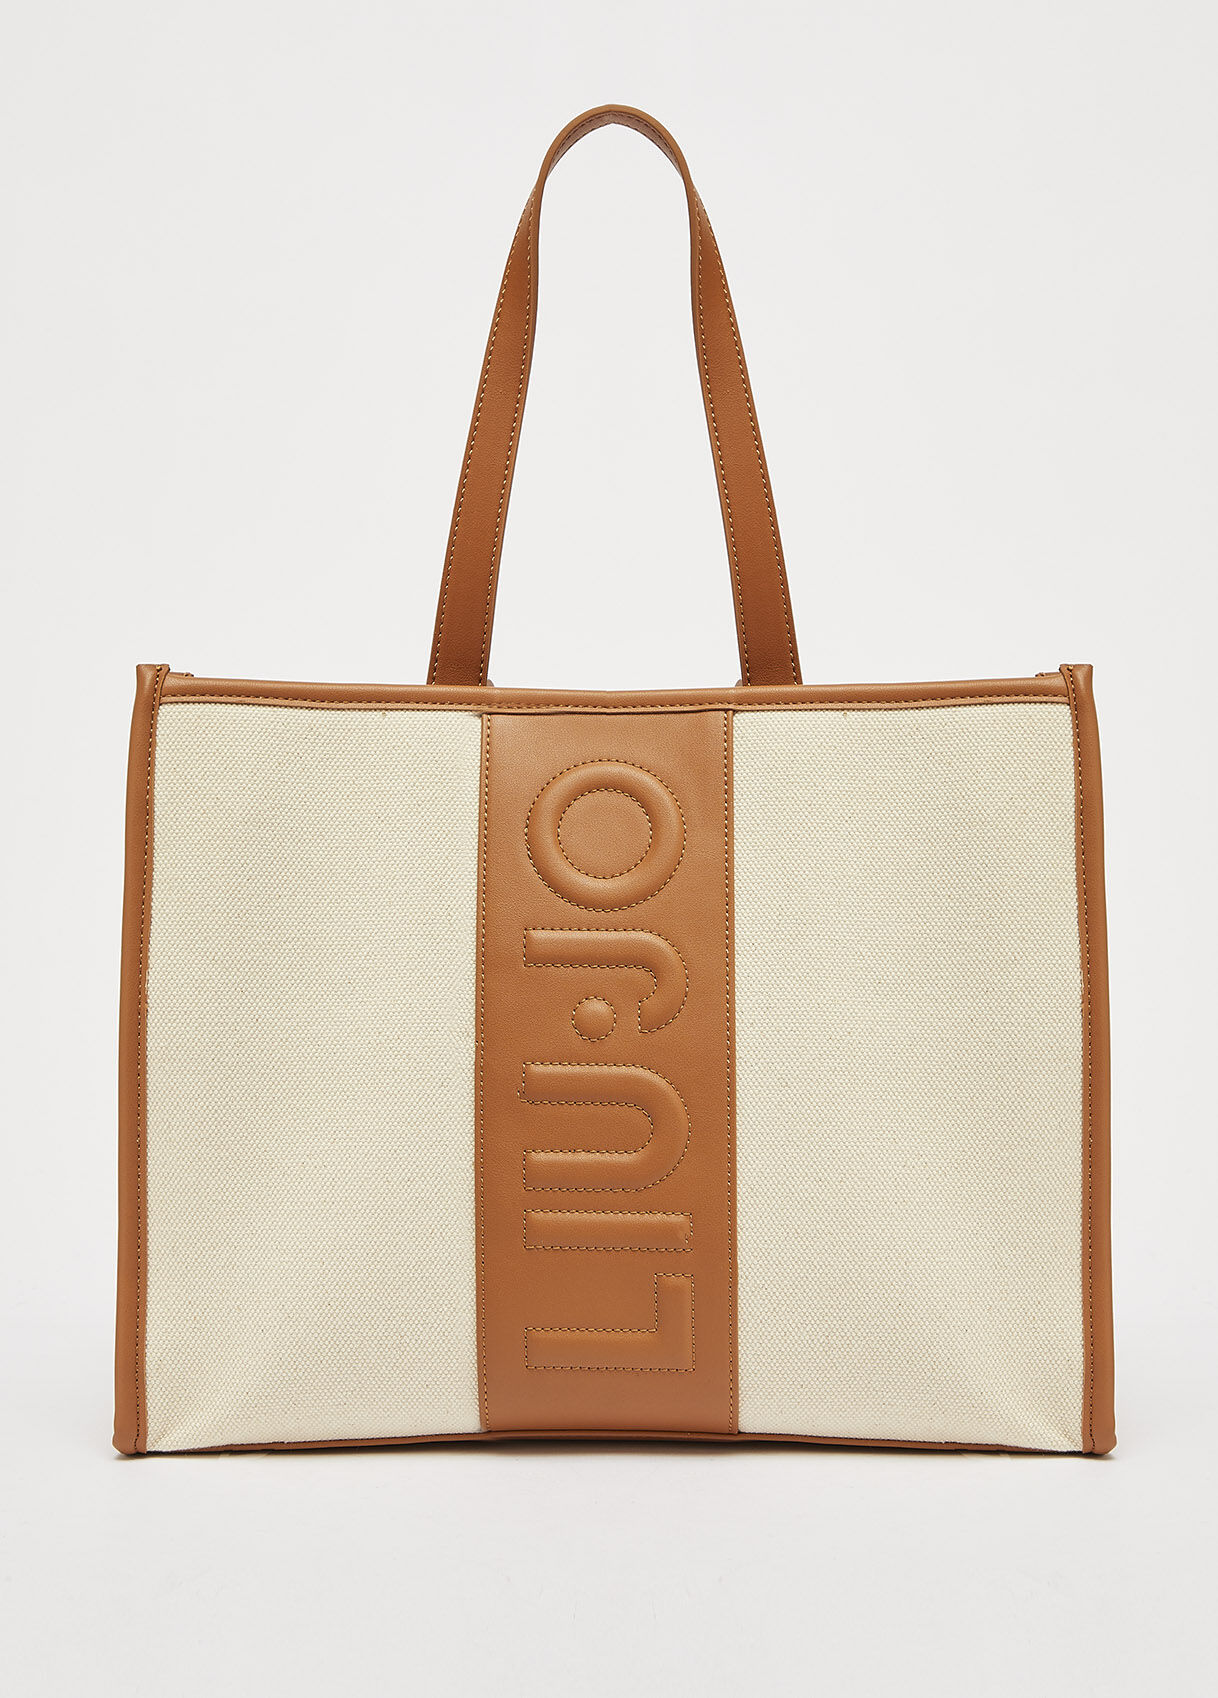 Women's Bags: Smart or Casual, Large and Small Bags | LIU JO